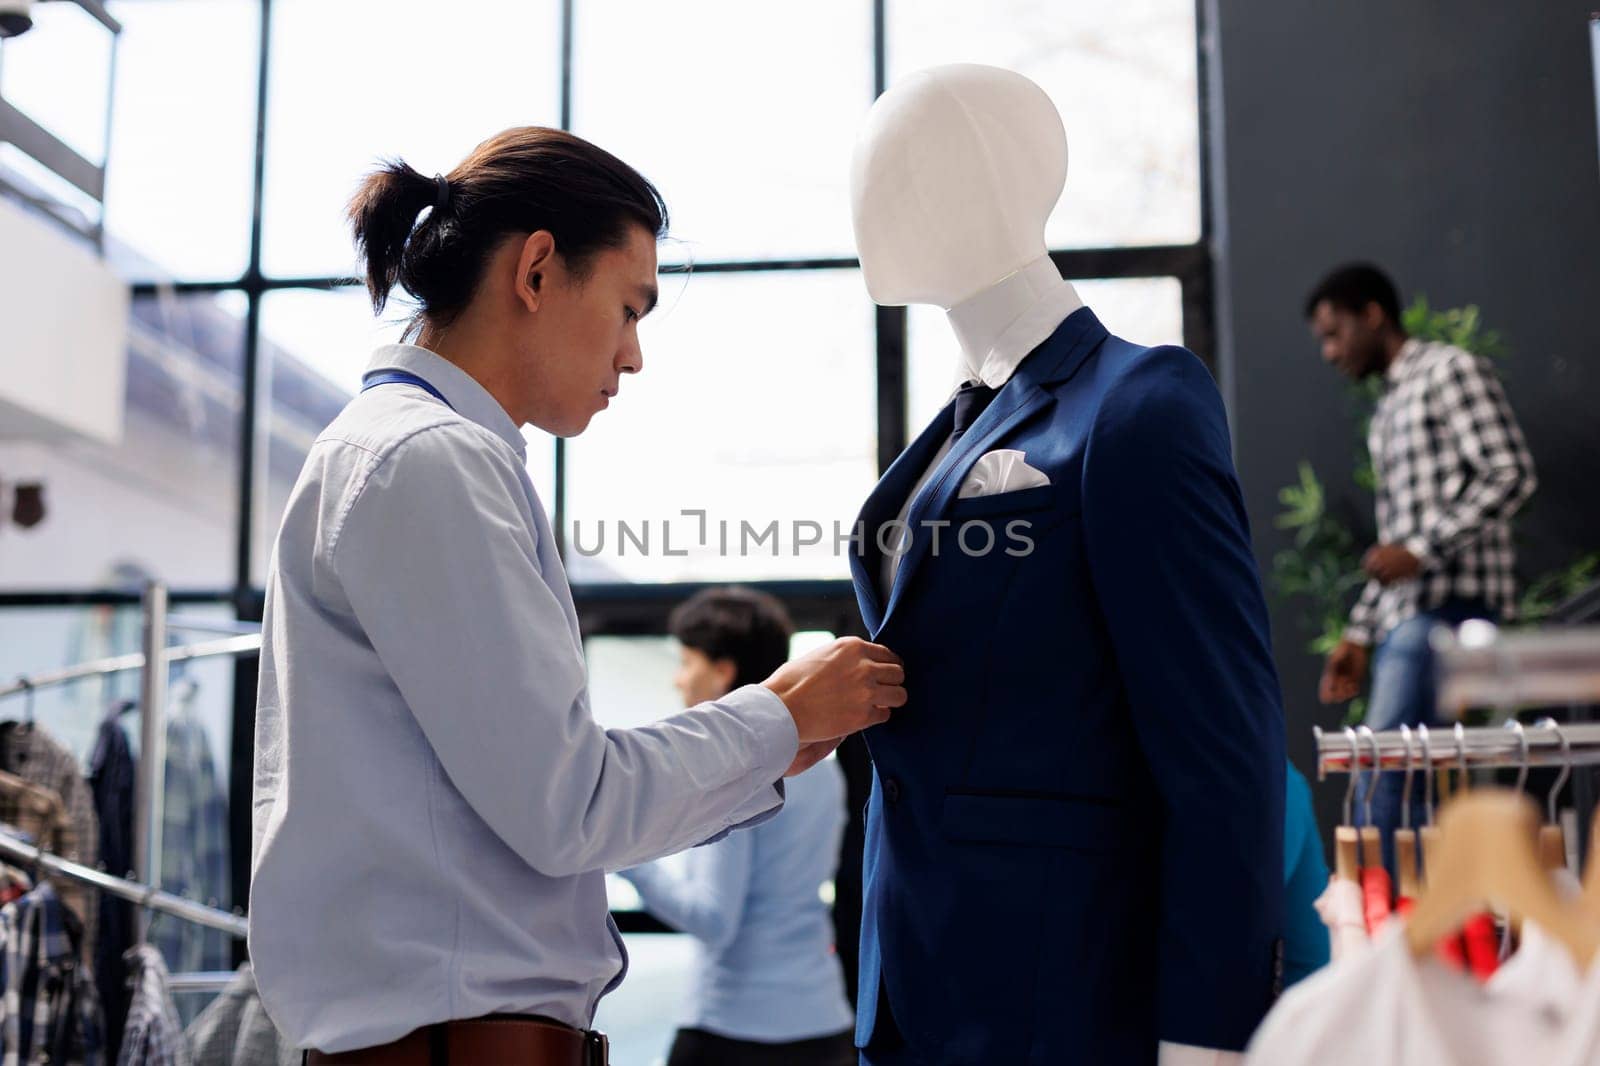 Asian worker arranging mannequin with formal suit, working at store visual with fashionable merchandise. Employee preparing boutique for opening, waiting for customers in shopping centre